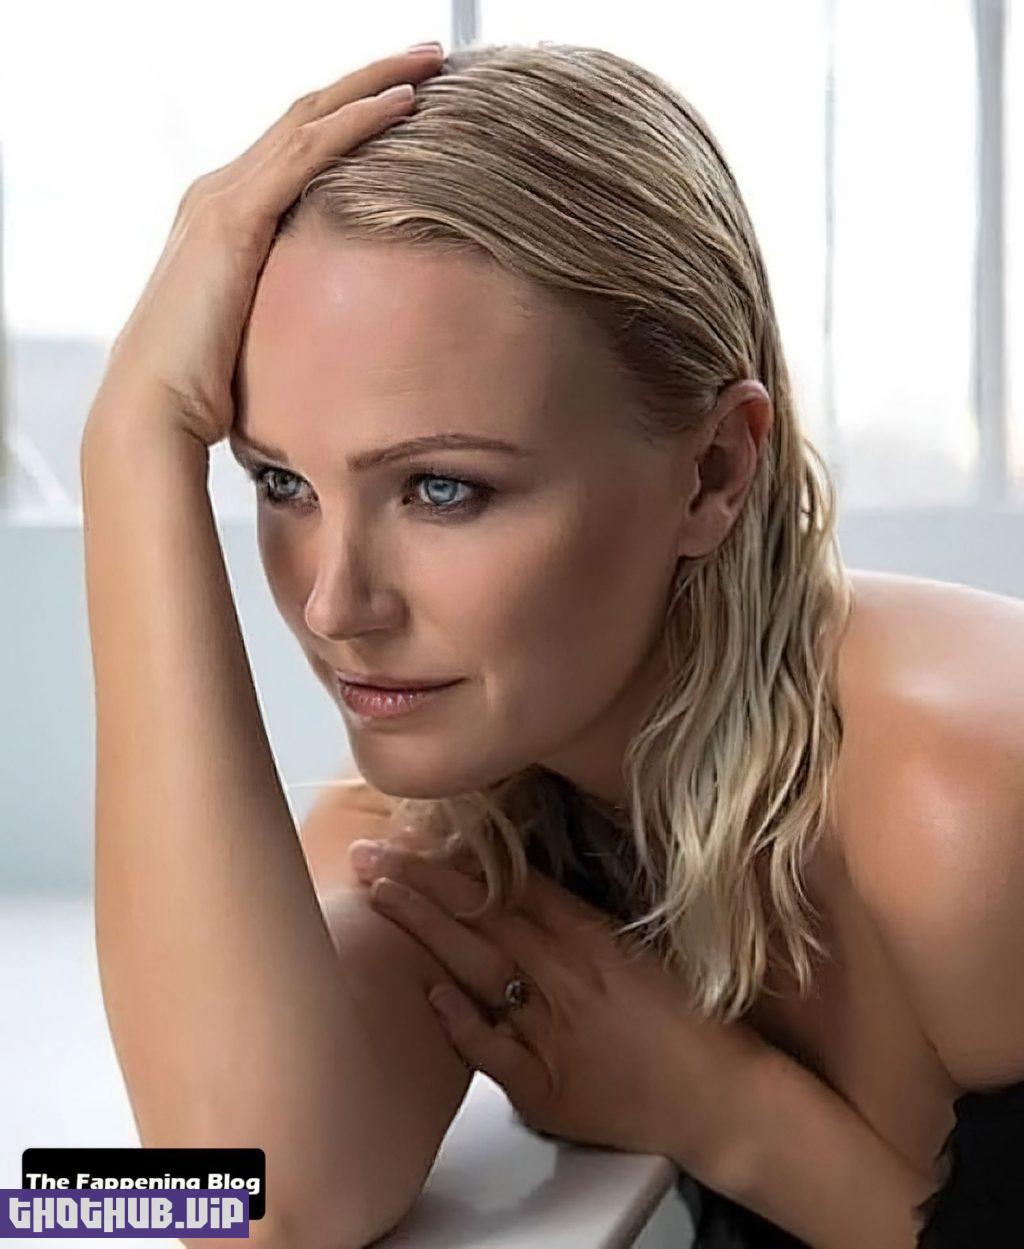 Malin Akerman Nude Photo Collection The Fappening Blog 3